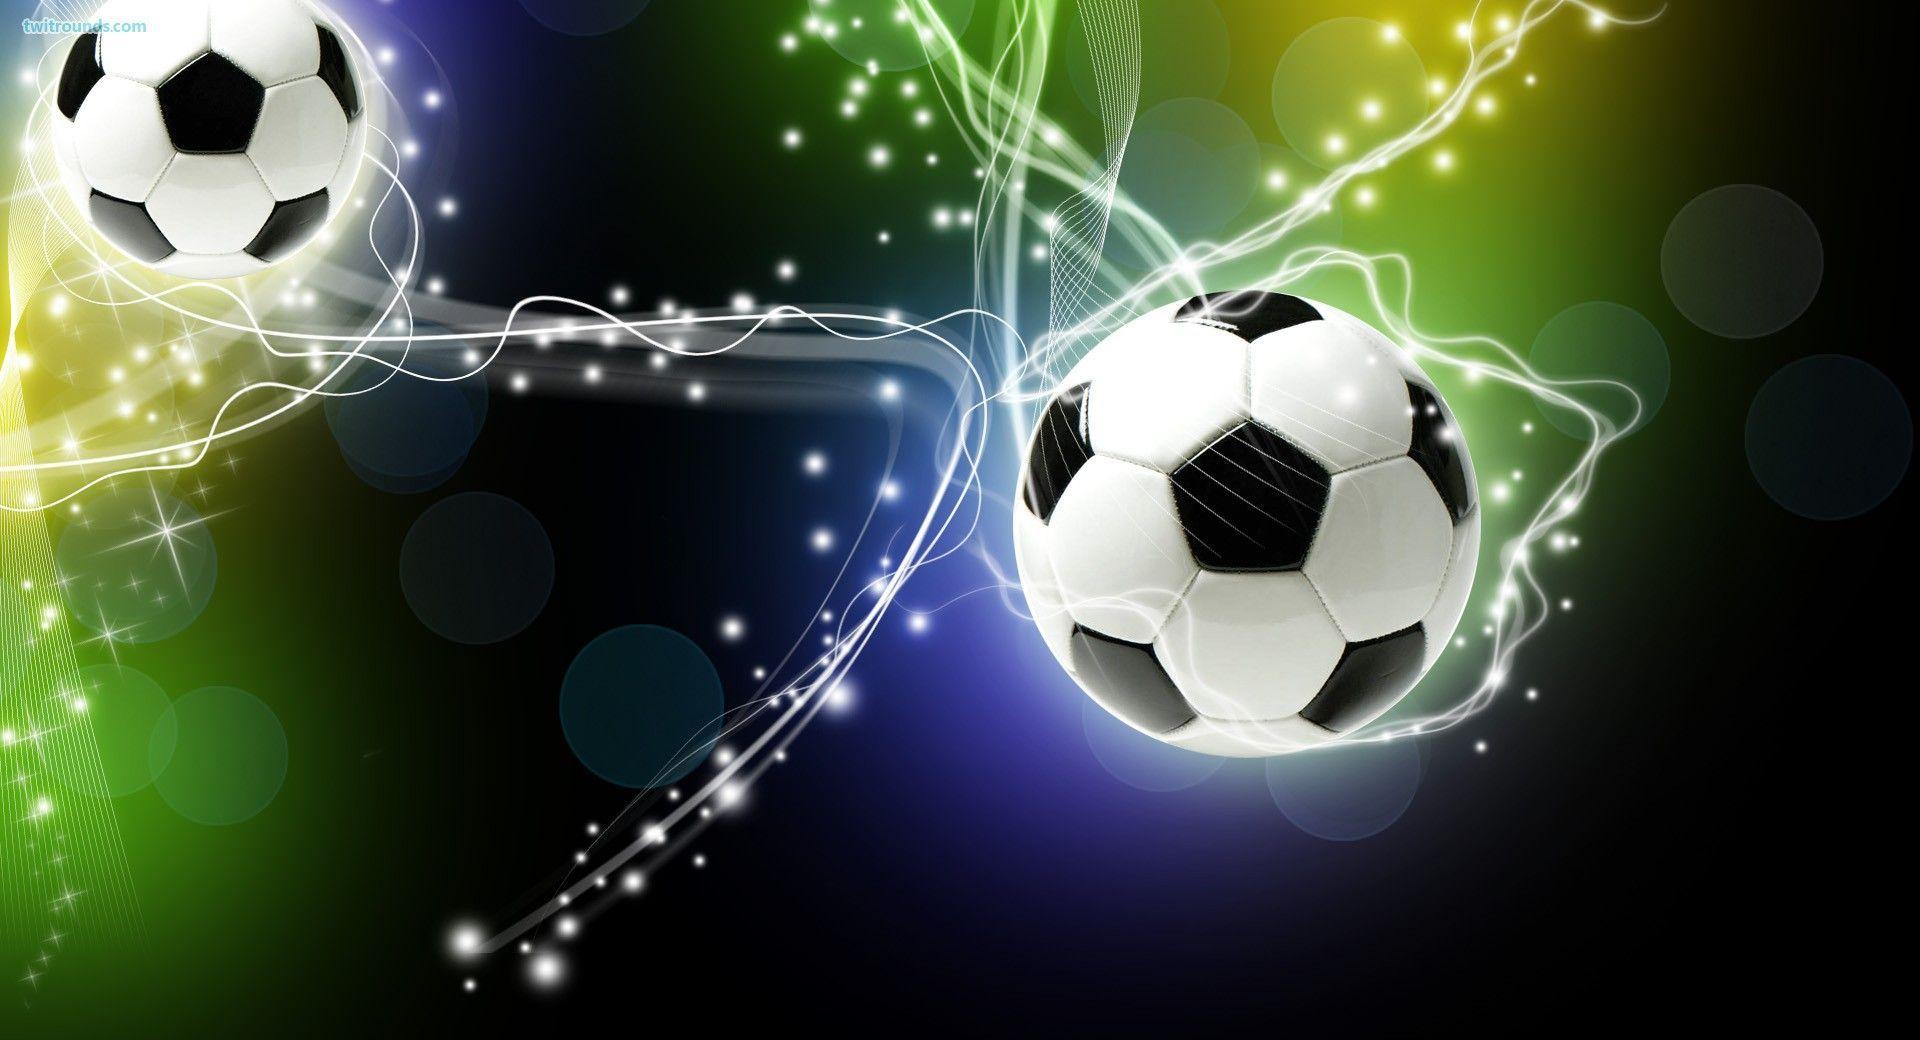 Cool Football Wallpaper Image Amp Pictures Becuo